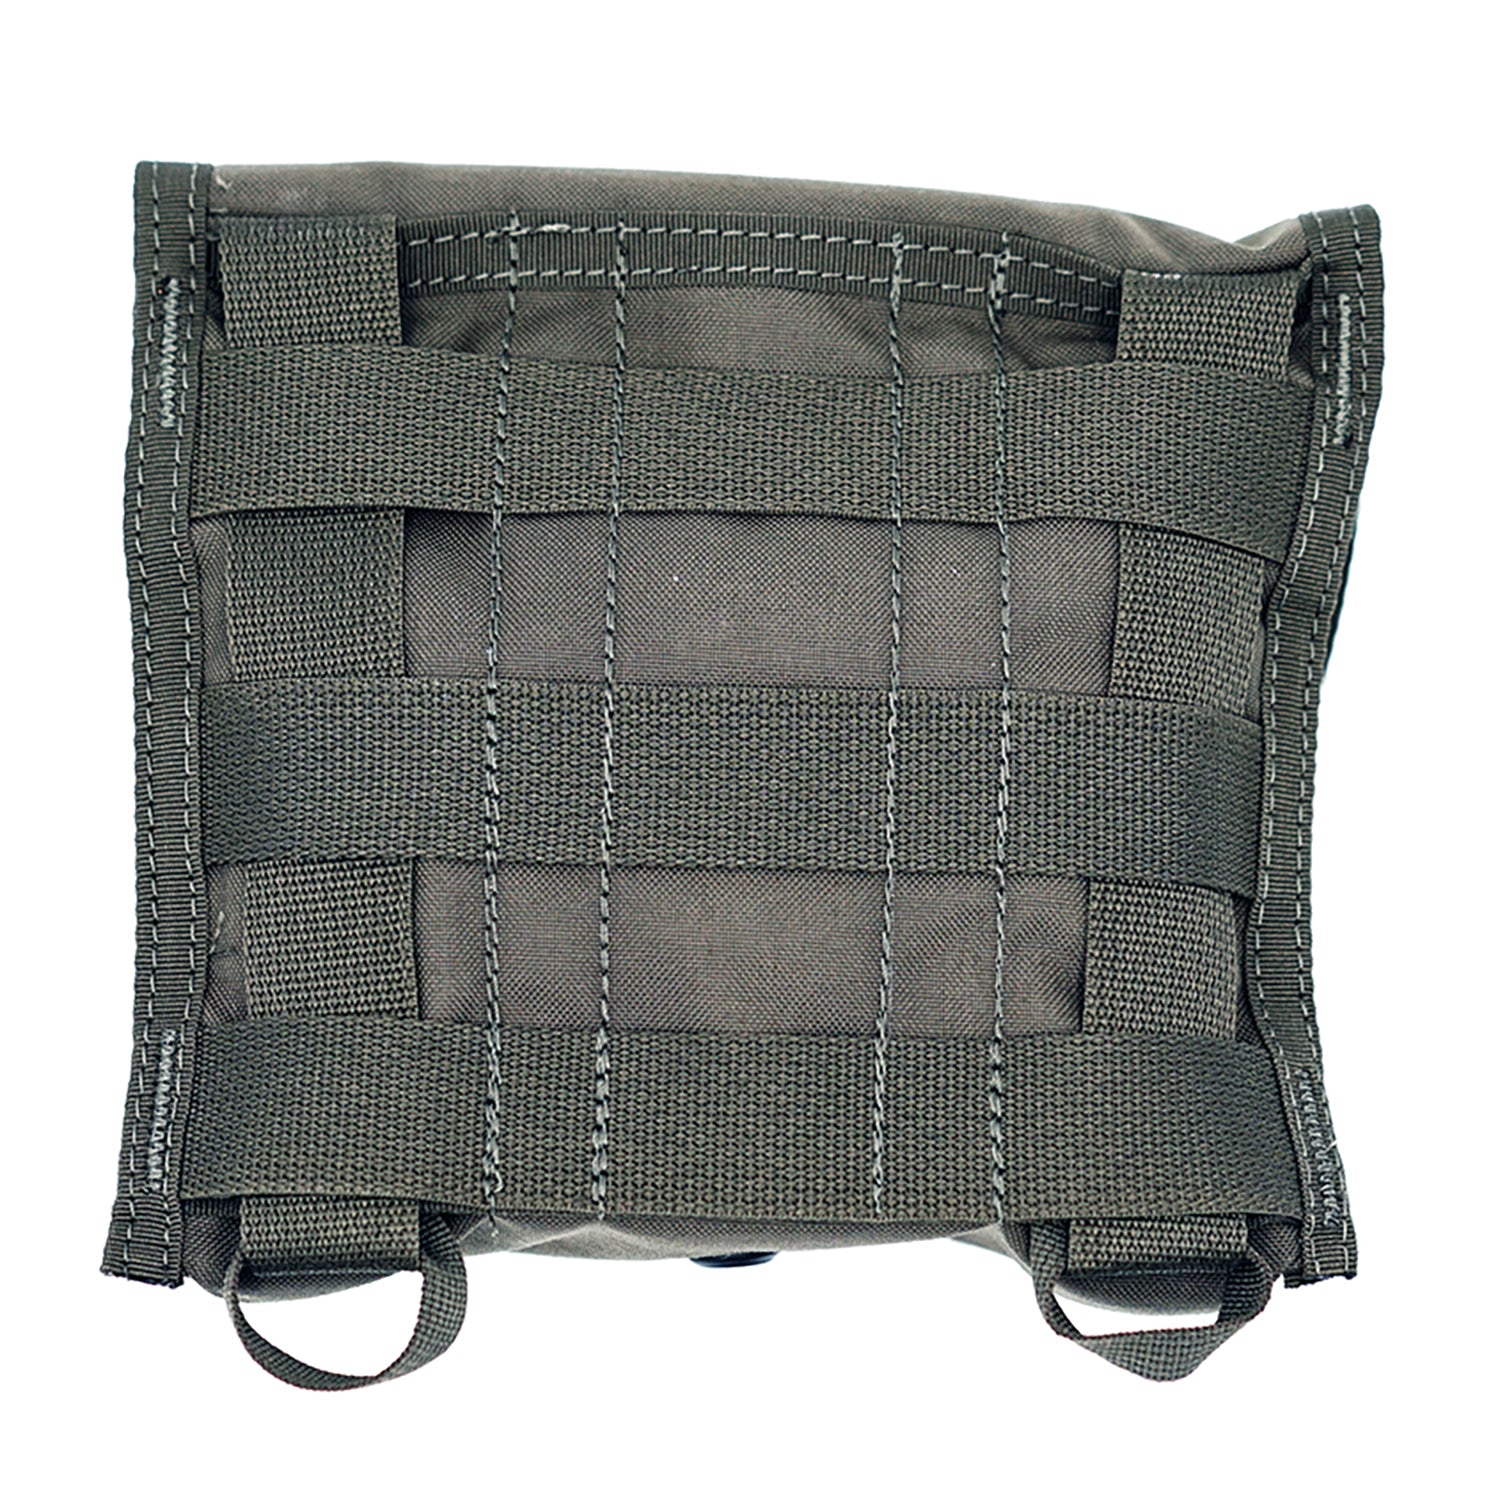 Pre MSA Paraclete style 50cal Pouch - Shekkin Gears